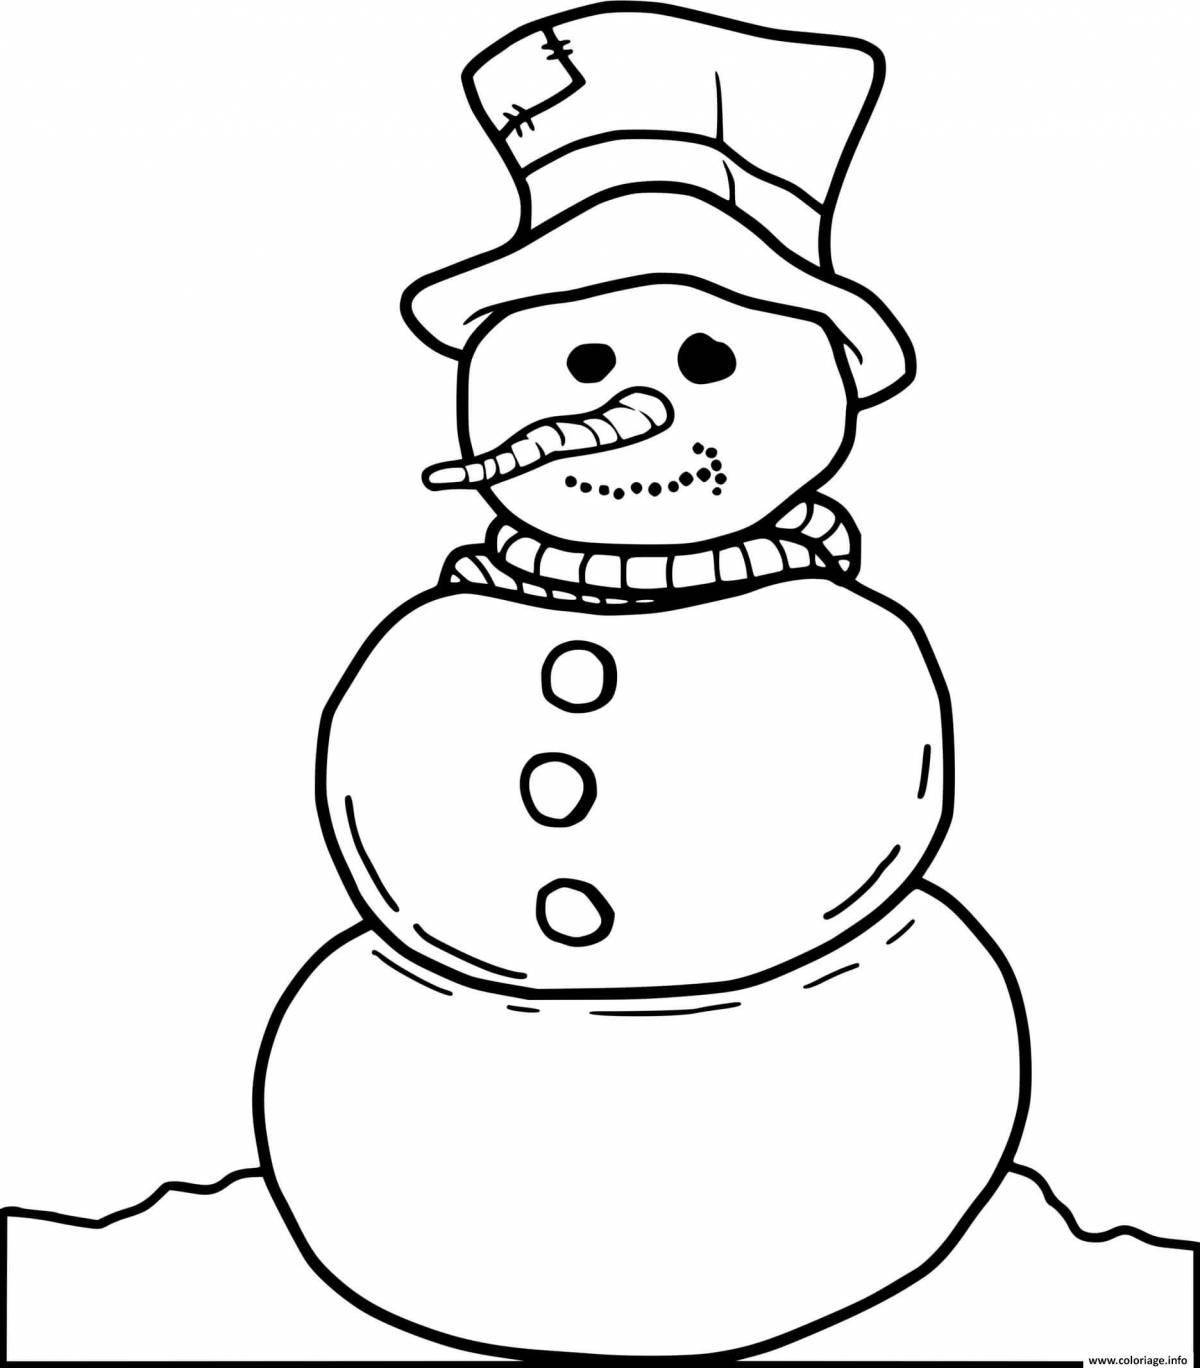 Fabulous coloring book snowman for kids